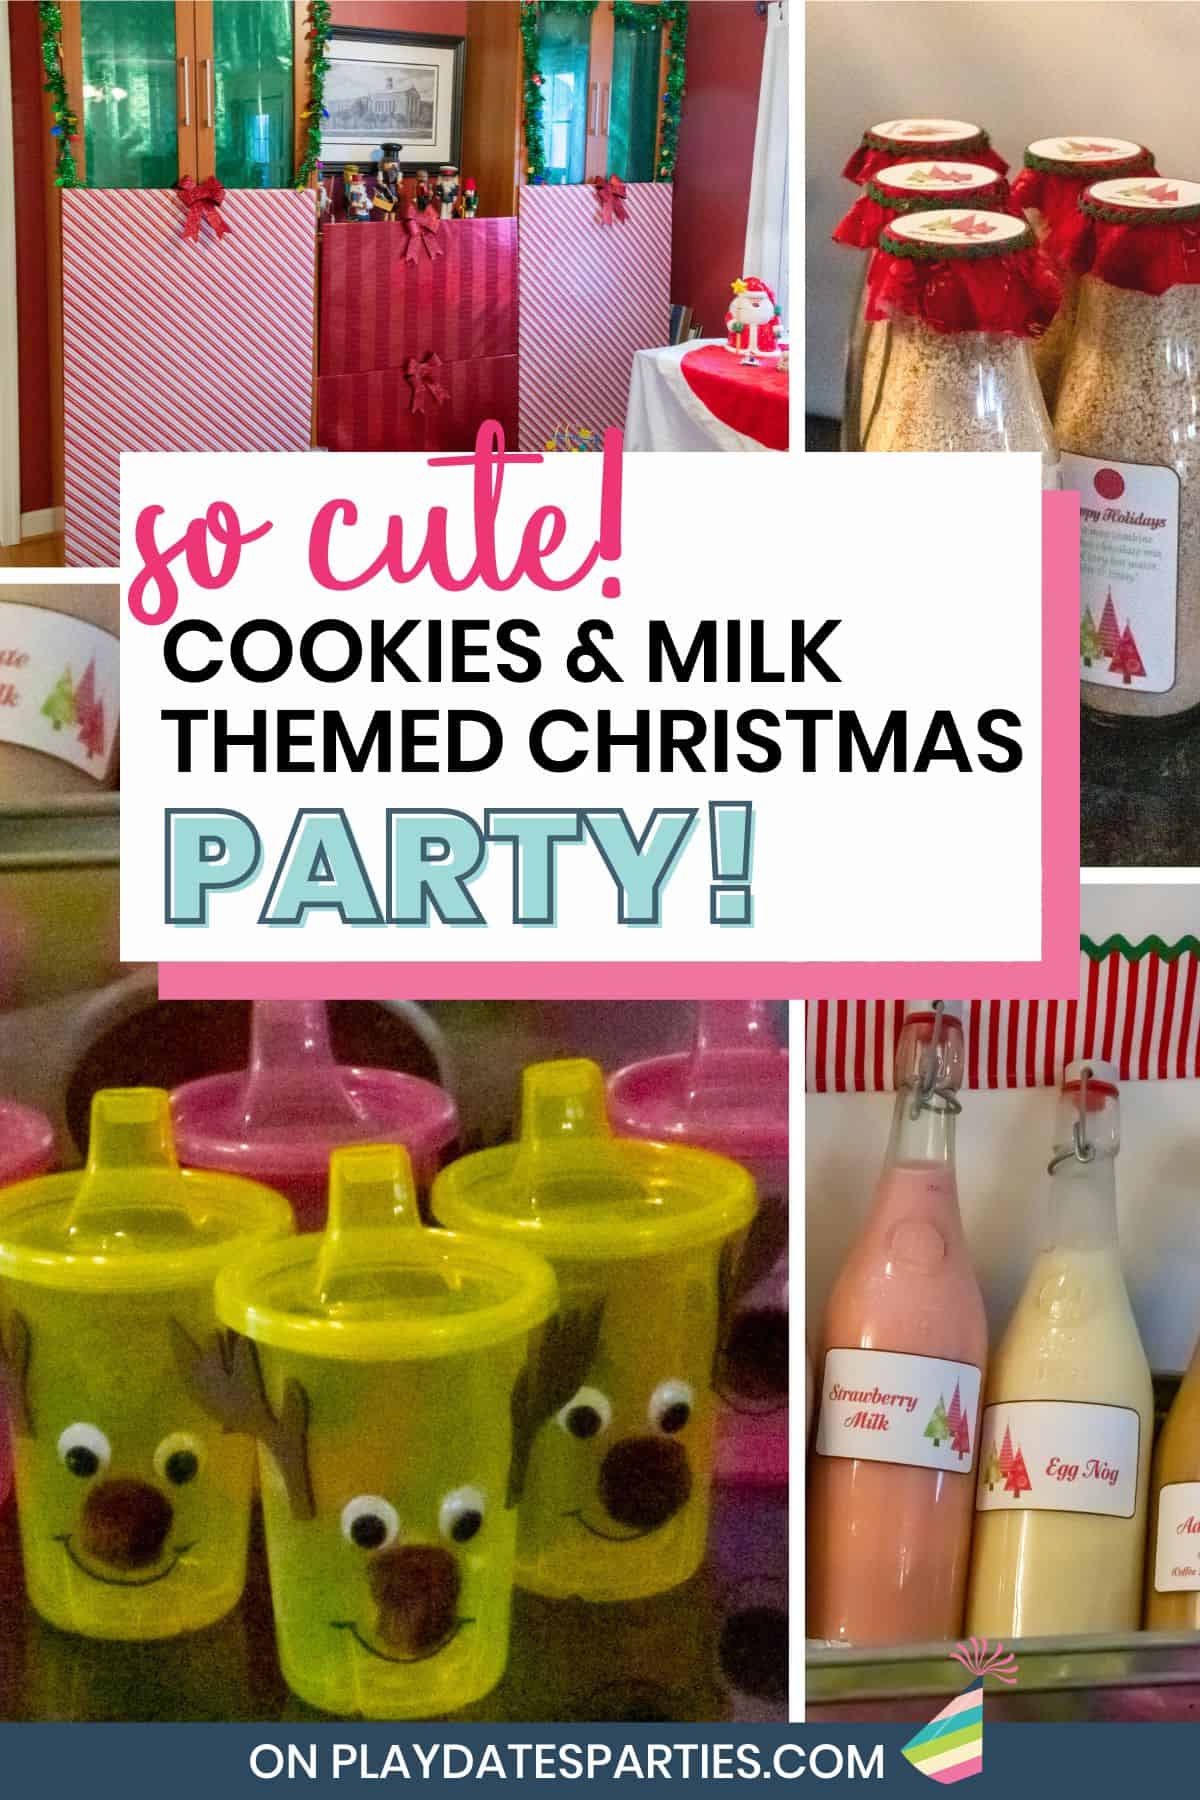 Collage of party photos with text so cute cookies and milk themed Christmas party!